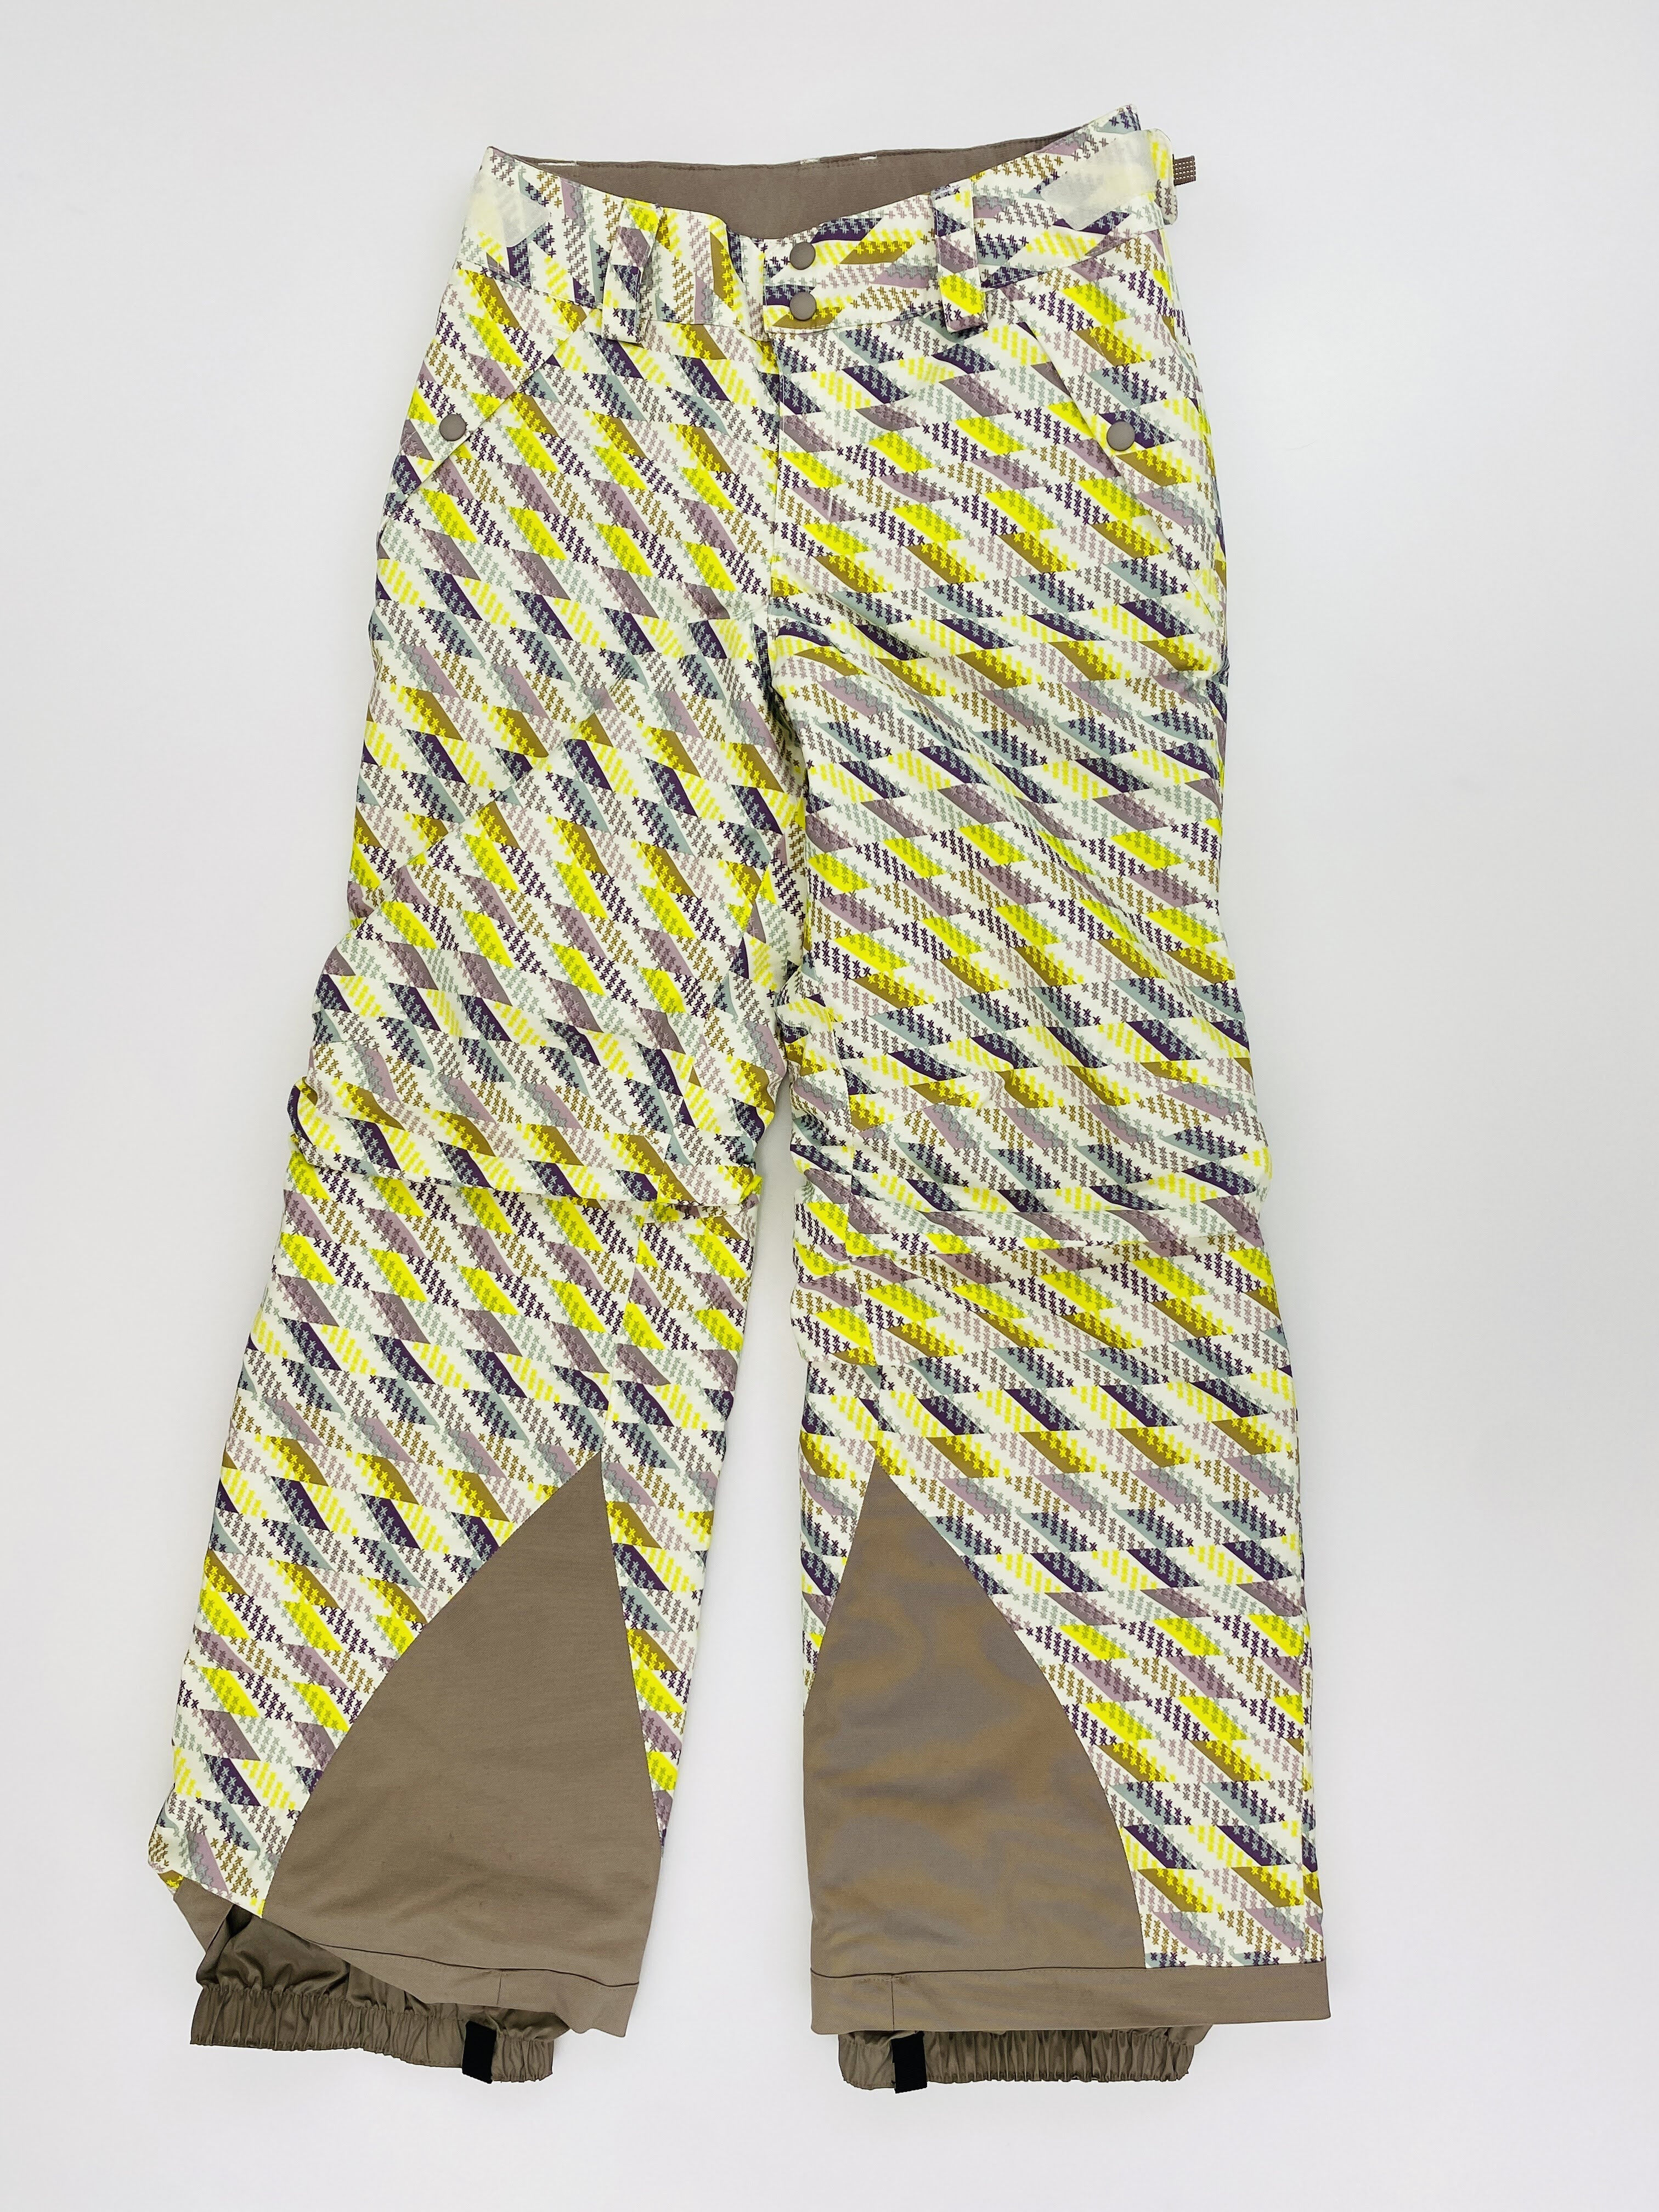 Patagonia Girls' Everyday Ready Pants - Second Hand Ski trousers - Kid's - Multicolored - M | Hardloop